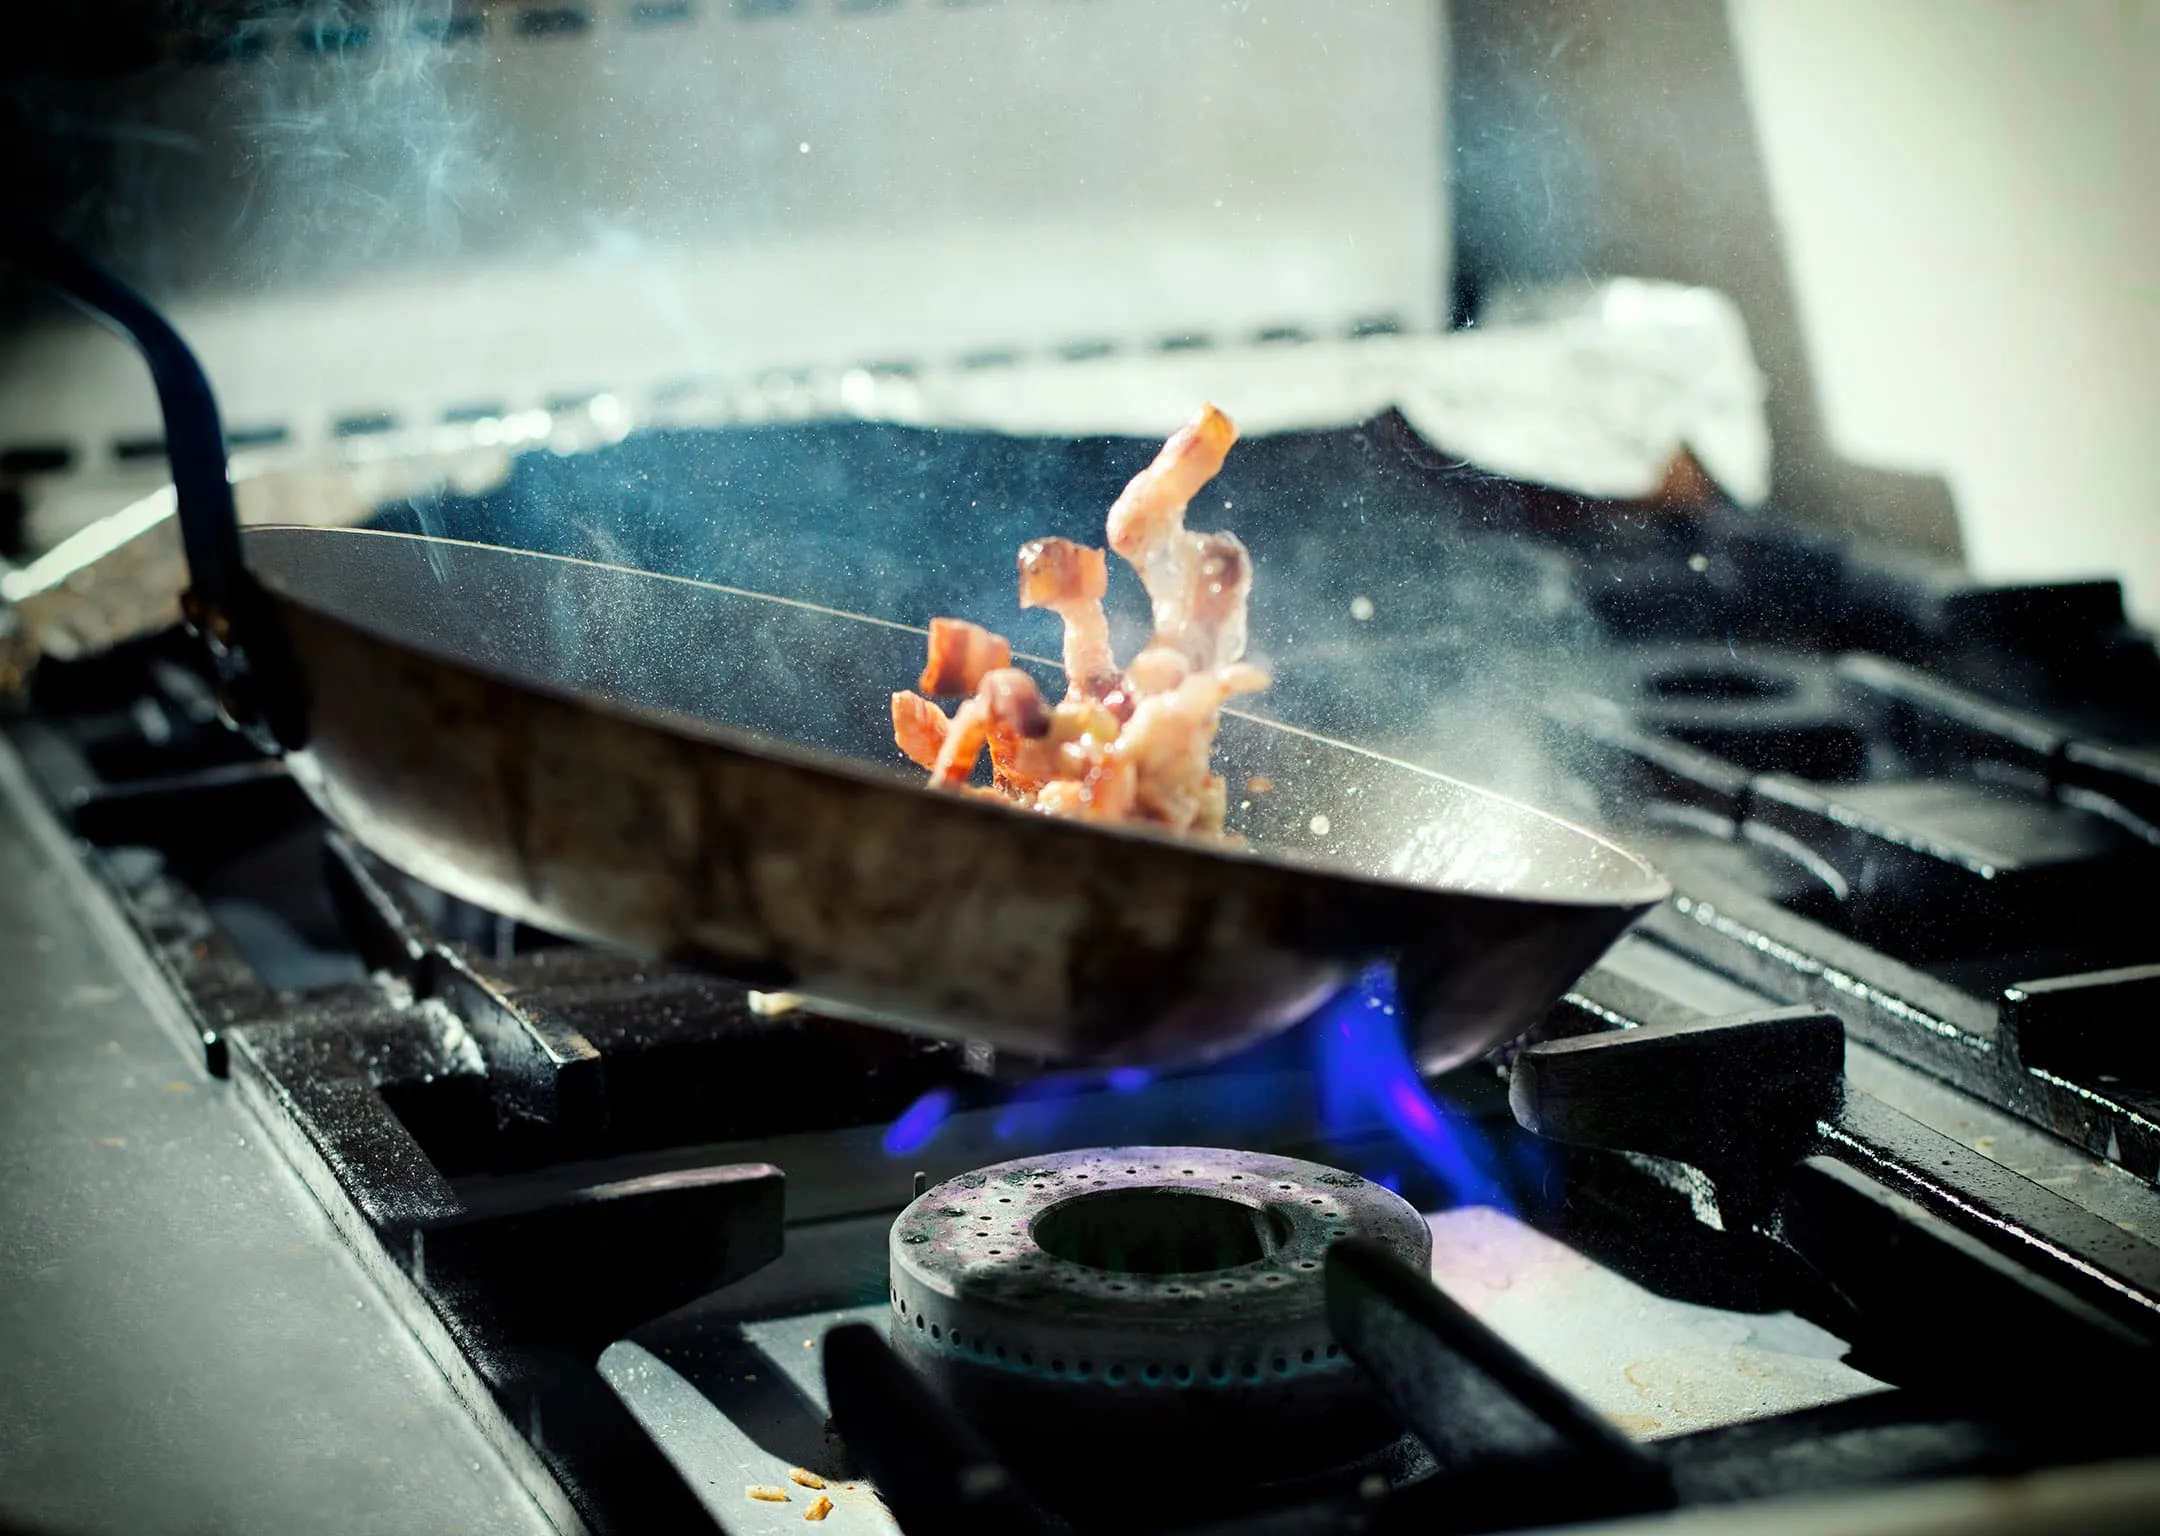 A frying pan tossing shrimp over a blue flame